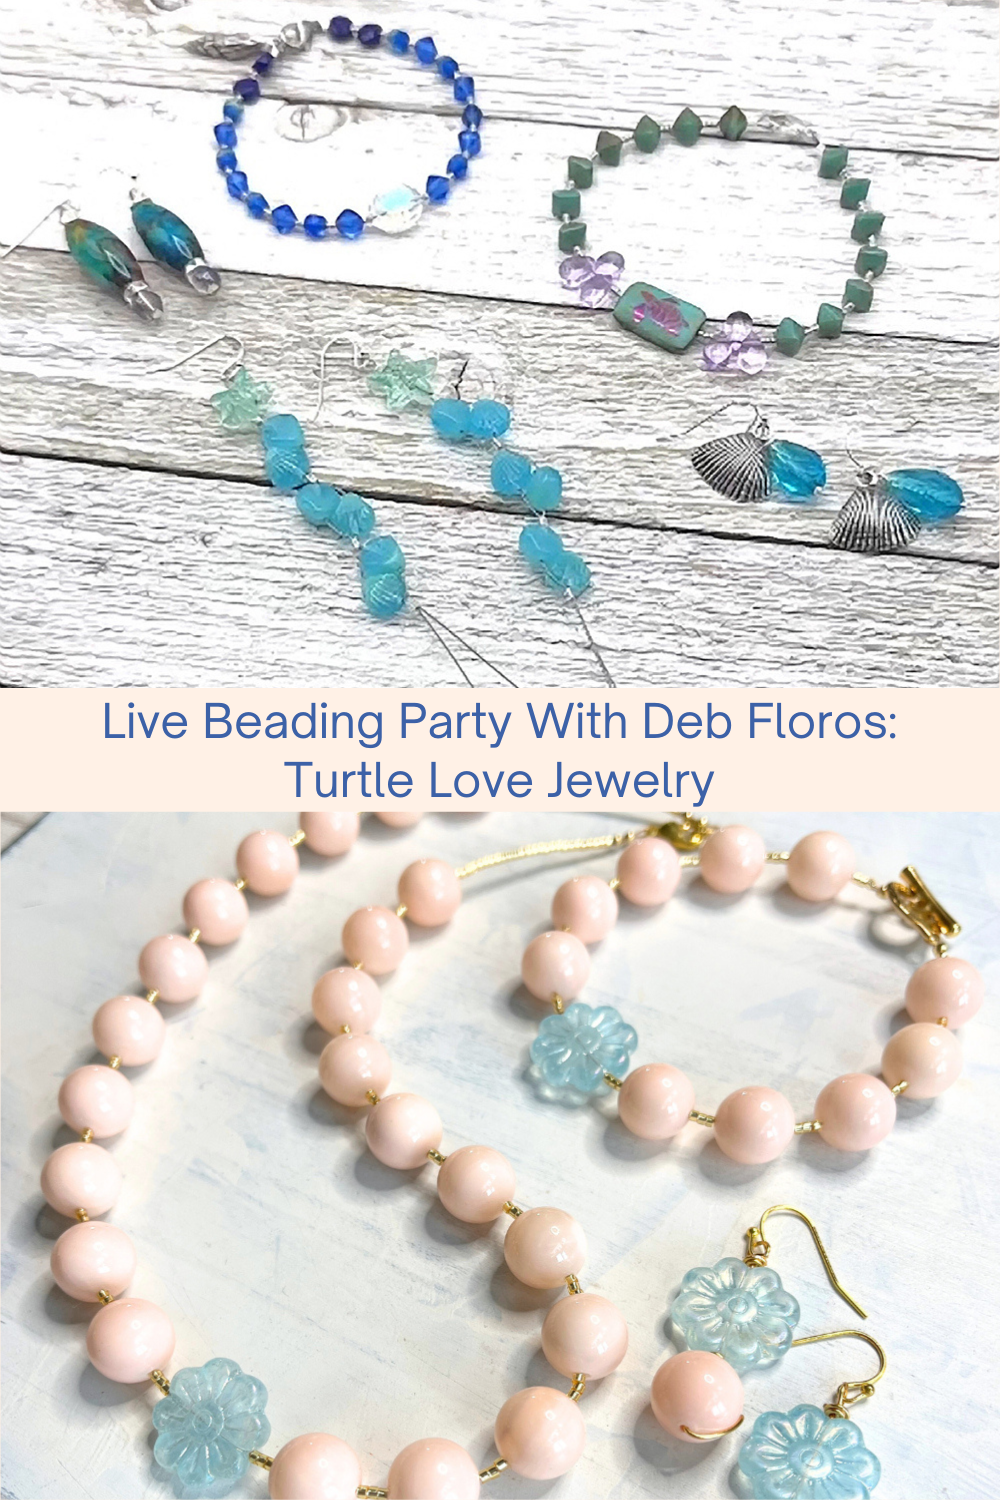 Live Beading Party With Deb Floros Turtle Love Jewelry Collage